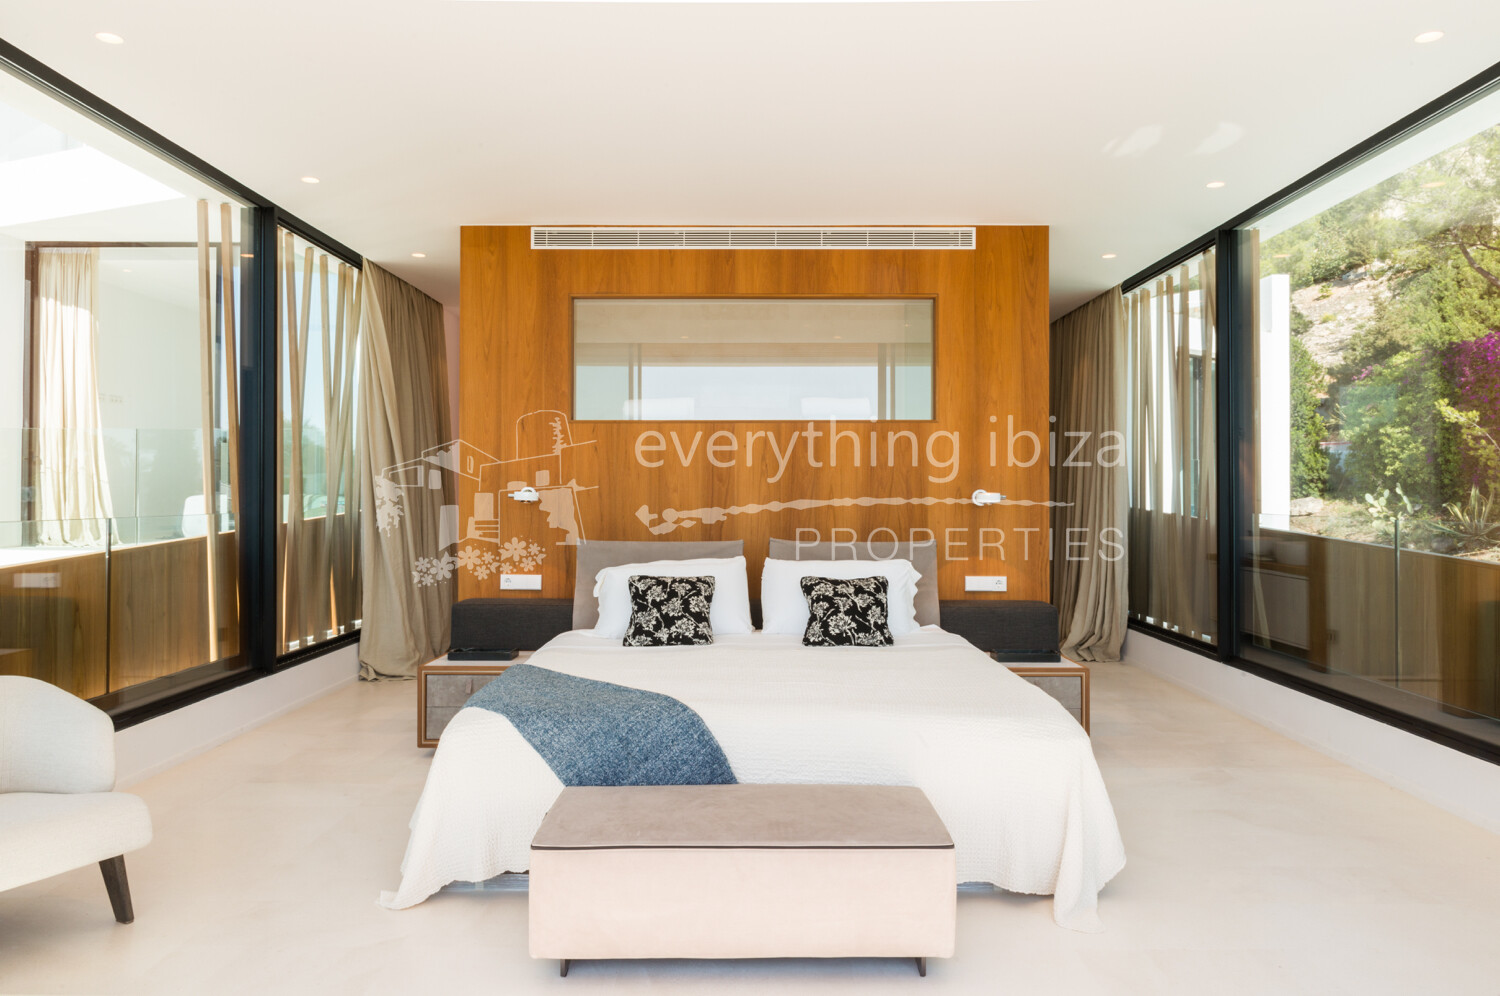 Beautiful Contemporary Villa with Elevated Views Over The Sea D'Alt Vila and Formentera, ref. 1673, for sale in Ibiza by everything ibiza Properties